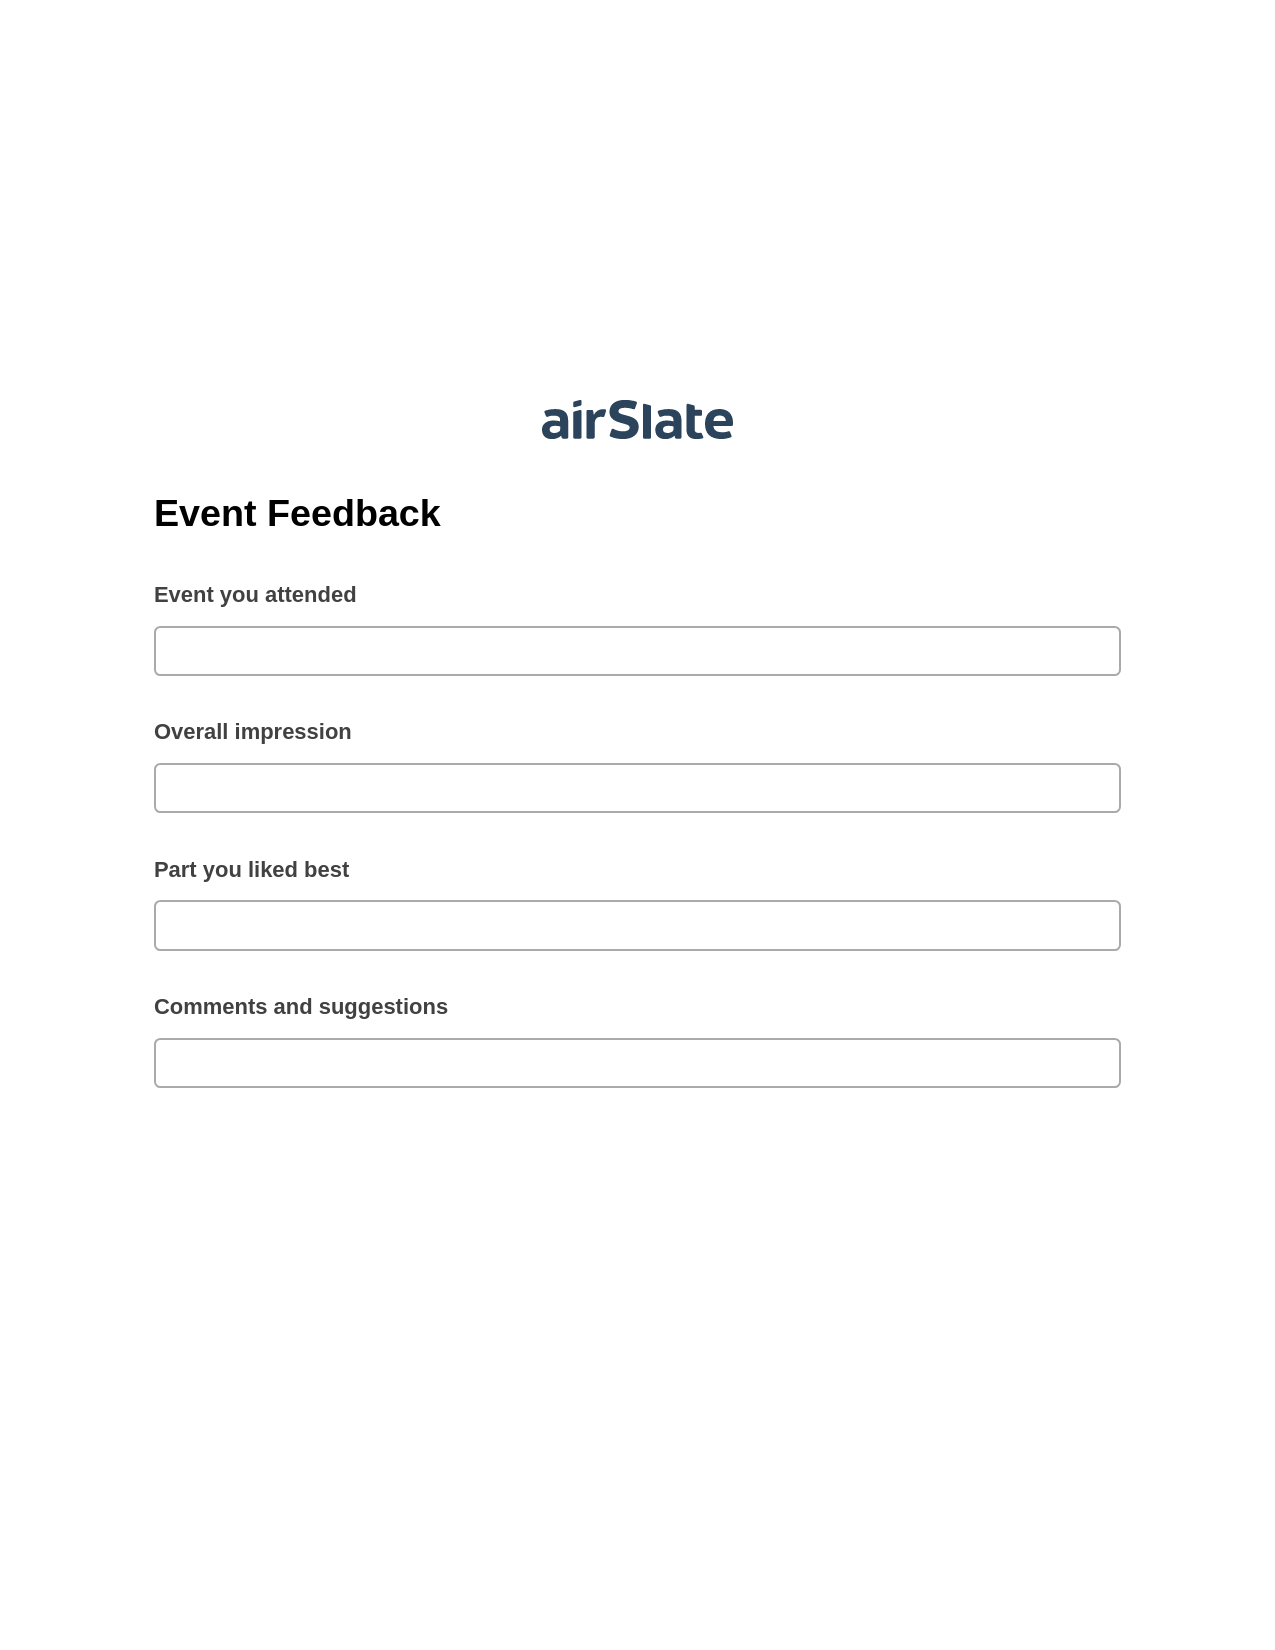 Multirole Event Feedback Pre-fill from another Slate Bot, Add Tags to Slate Bot, Export to NetSuite Record Bot